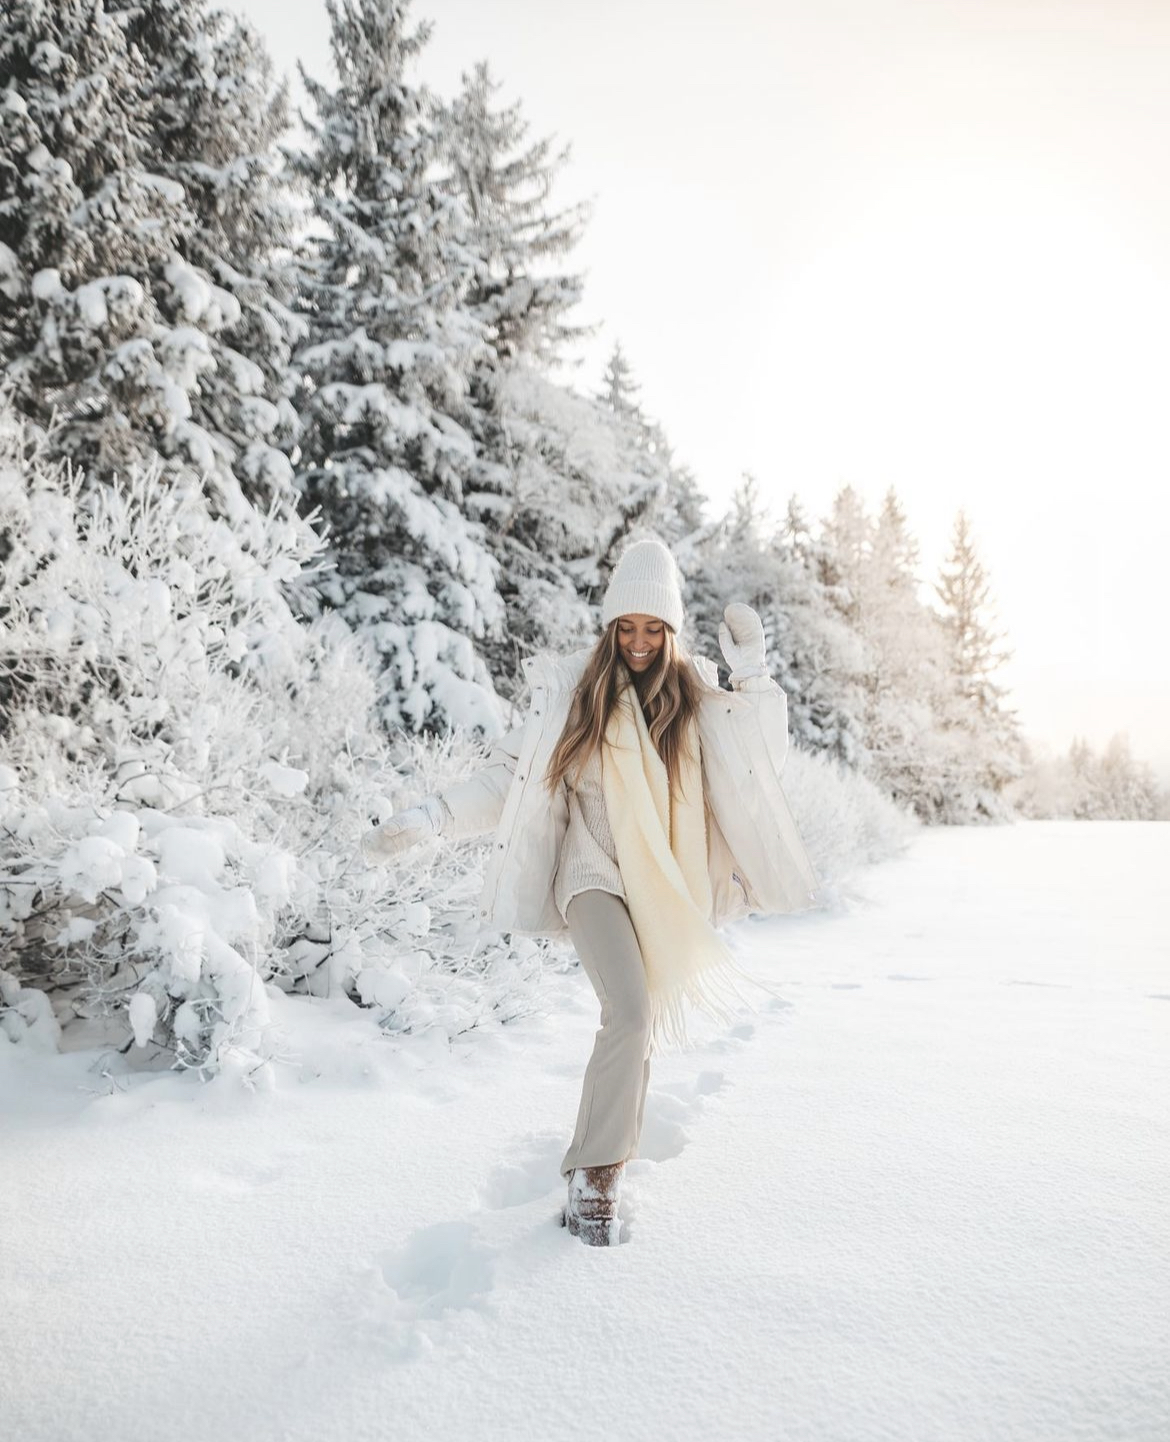 Winter selfcare ideas to add to your routine - get some fresh air